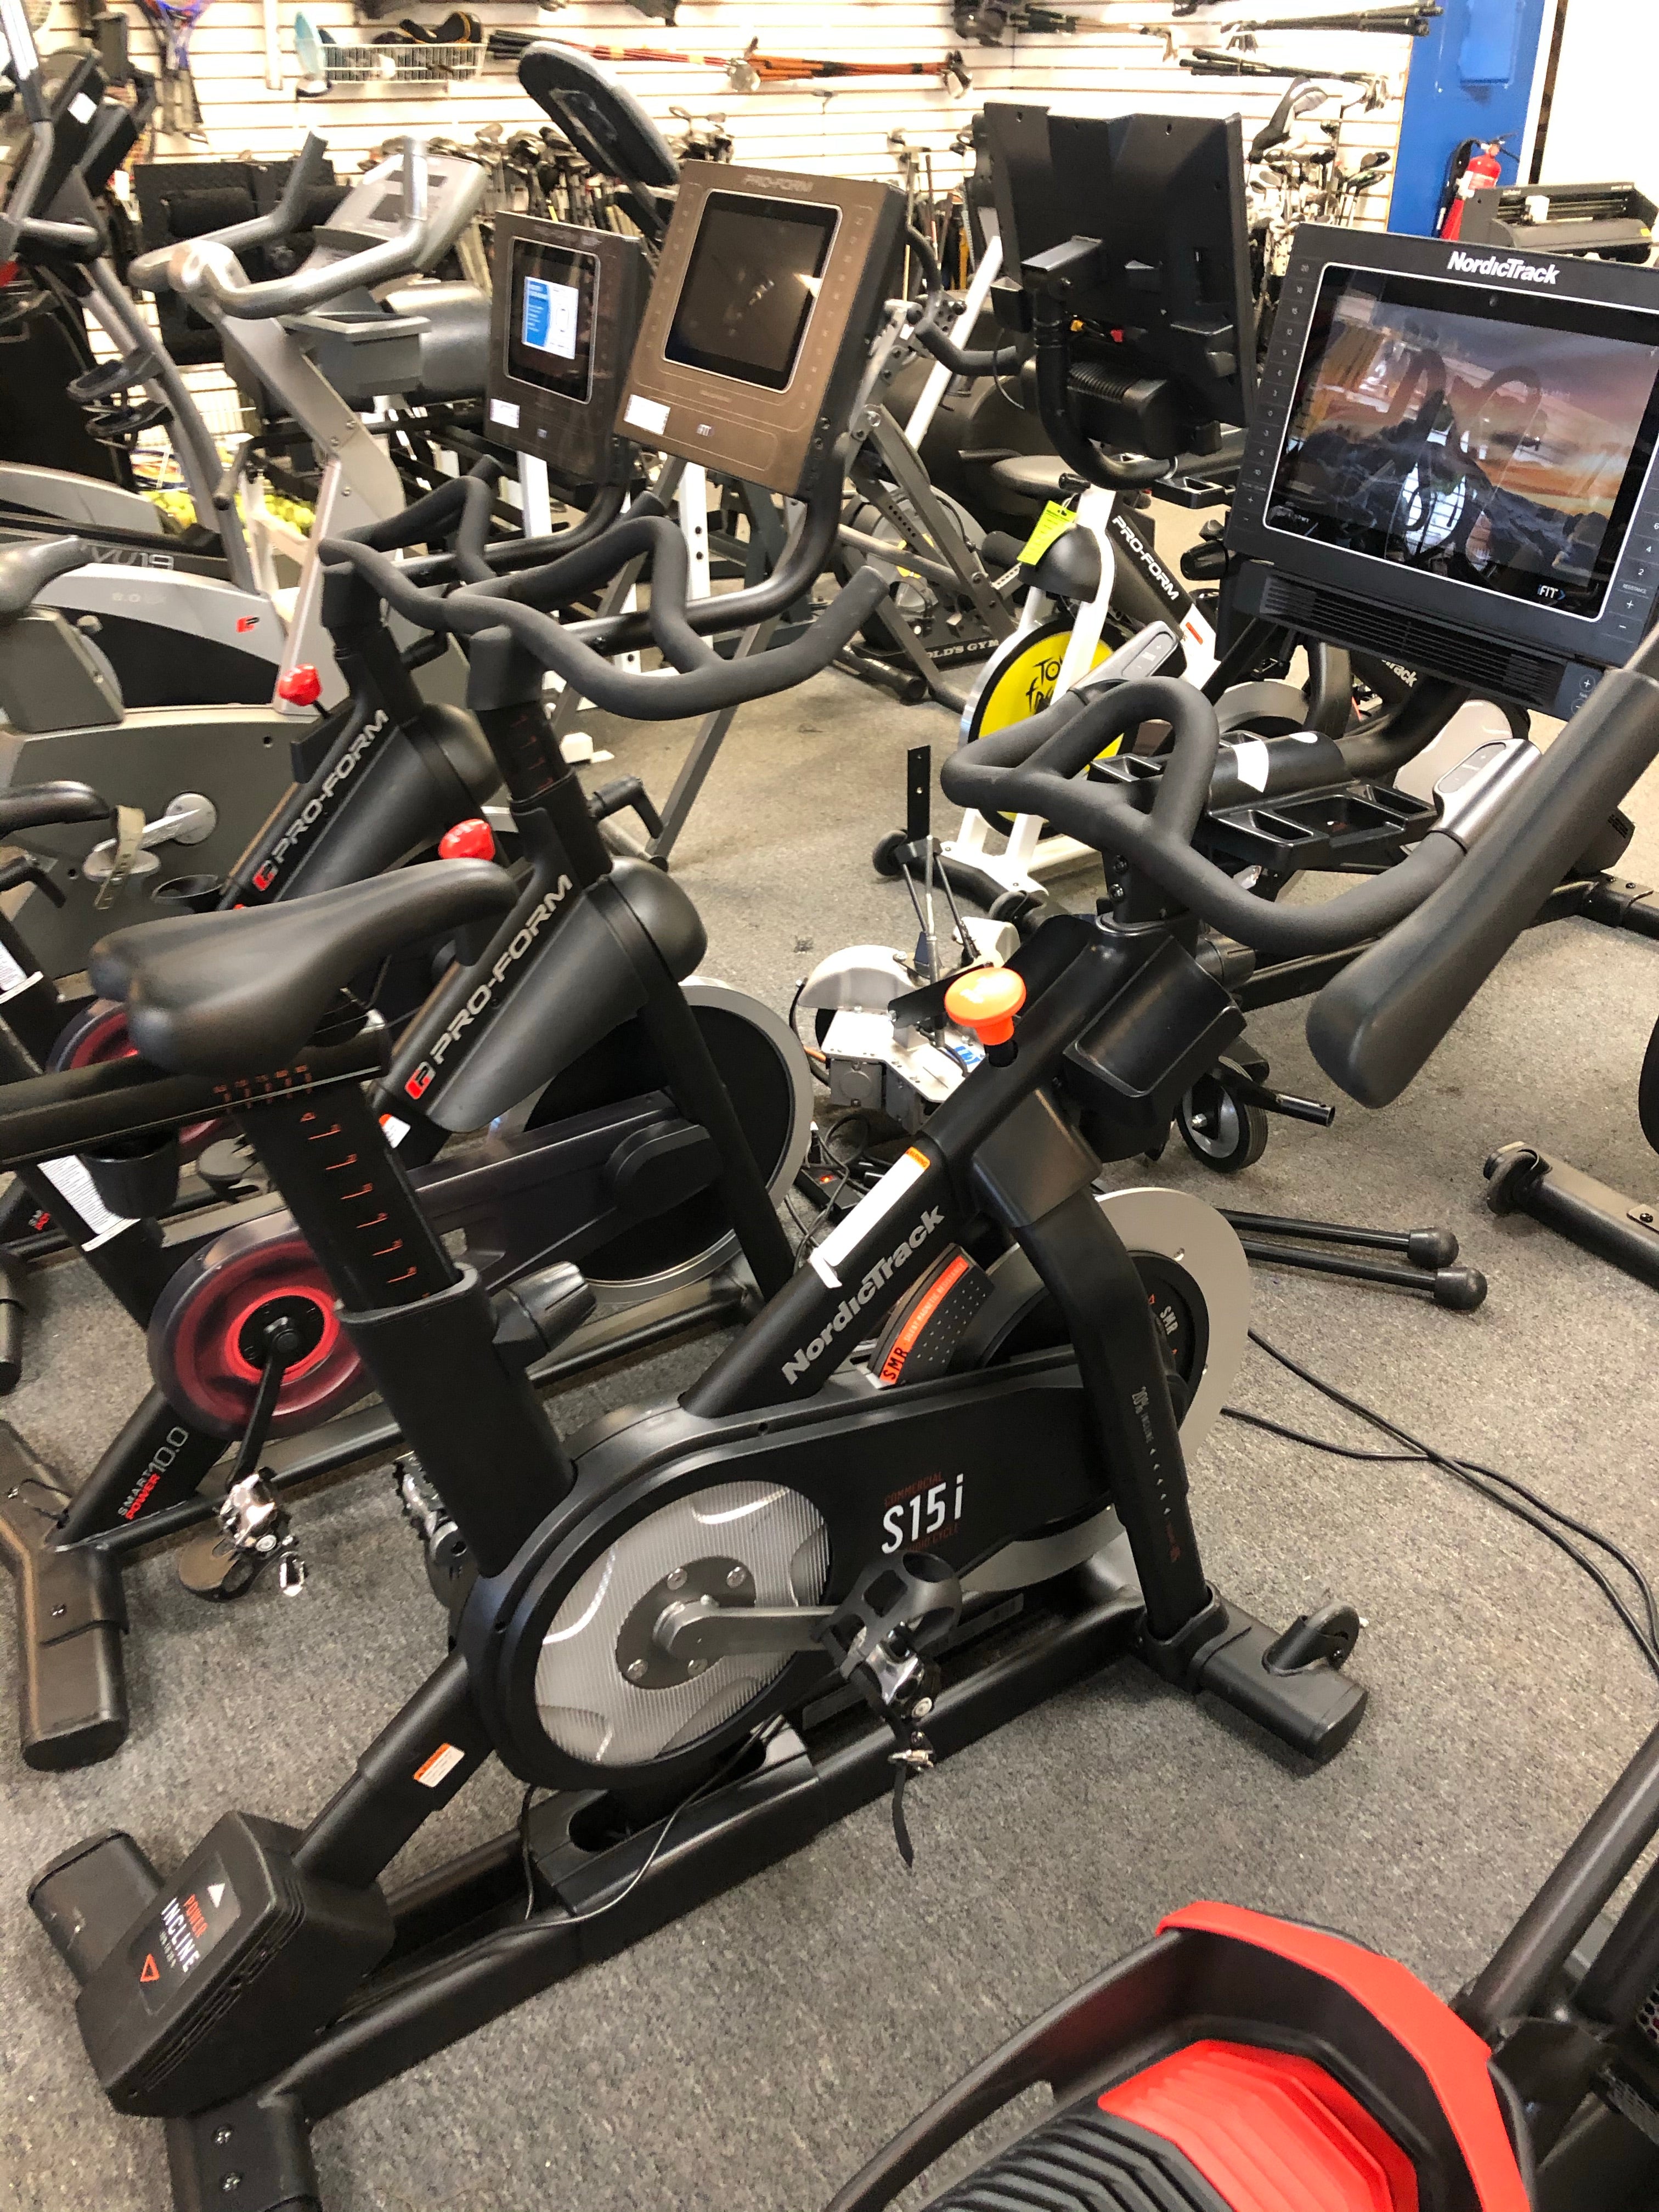 2020 Nordictrack Commercial S15i Studio Cycle Overstock Sale Sports Fitness Exchange